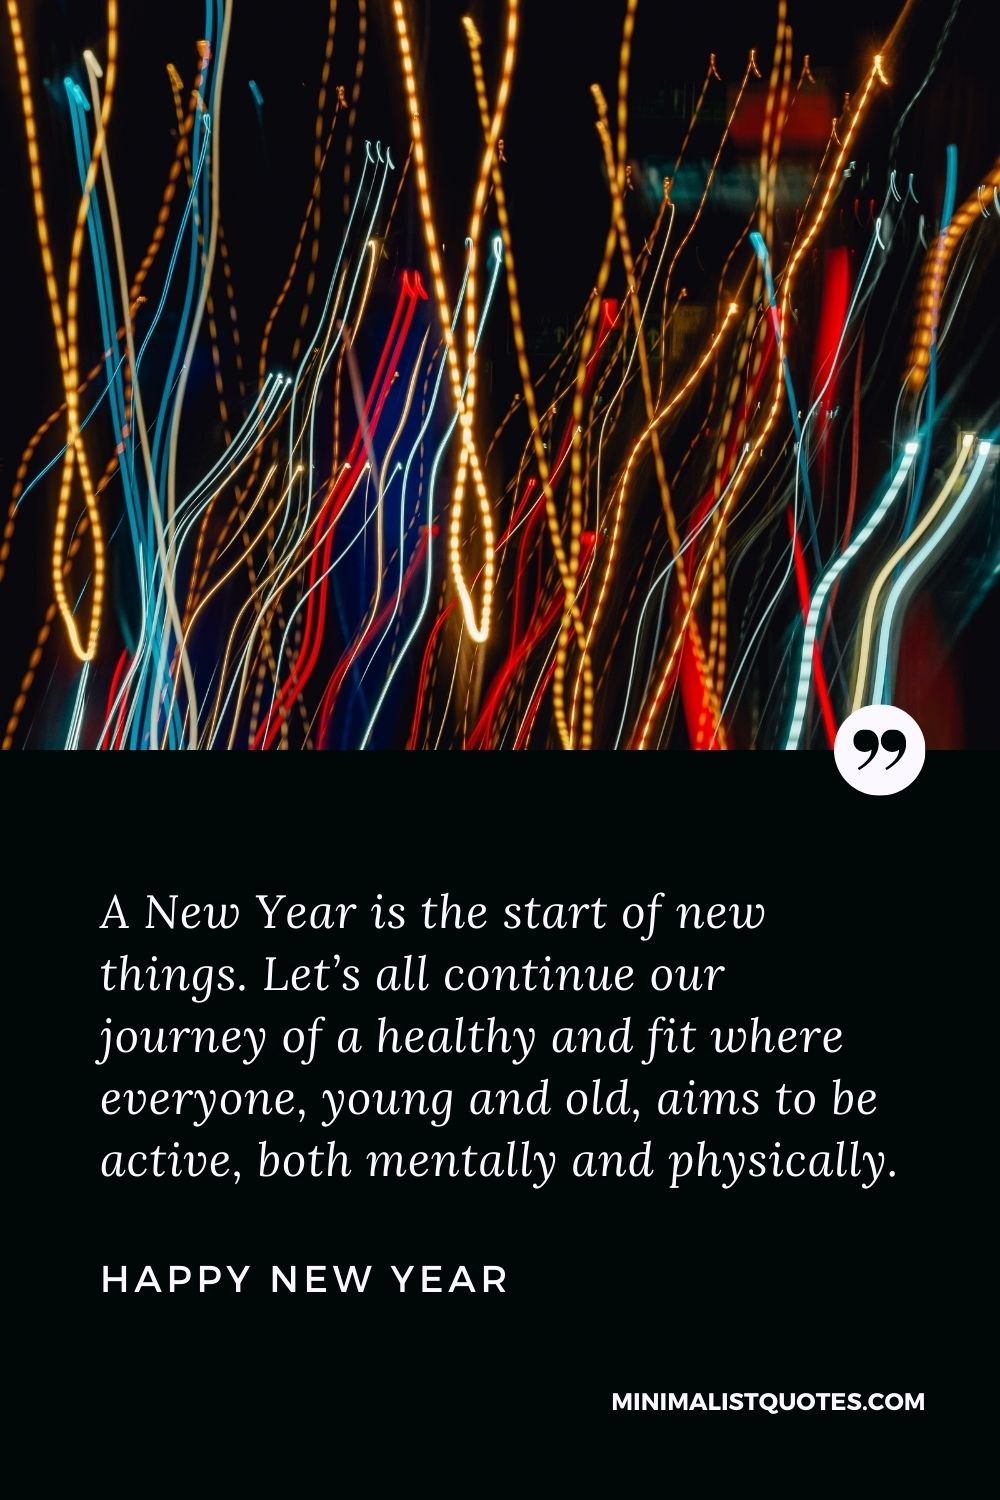 New Year Wish & Message With HD Image: A New Year is the start of new things. Let’s all continue our journey of a healthy and fit where everyone, young and old, aims to be active, both mentally and physically. Happy New Year!